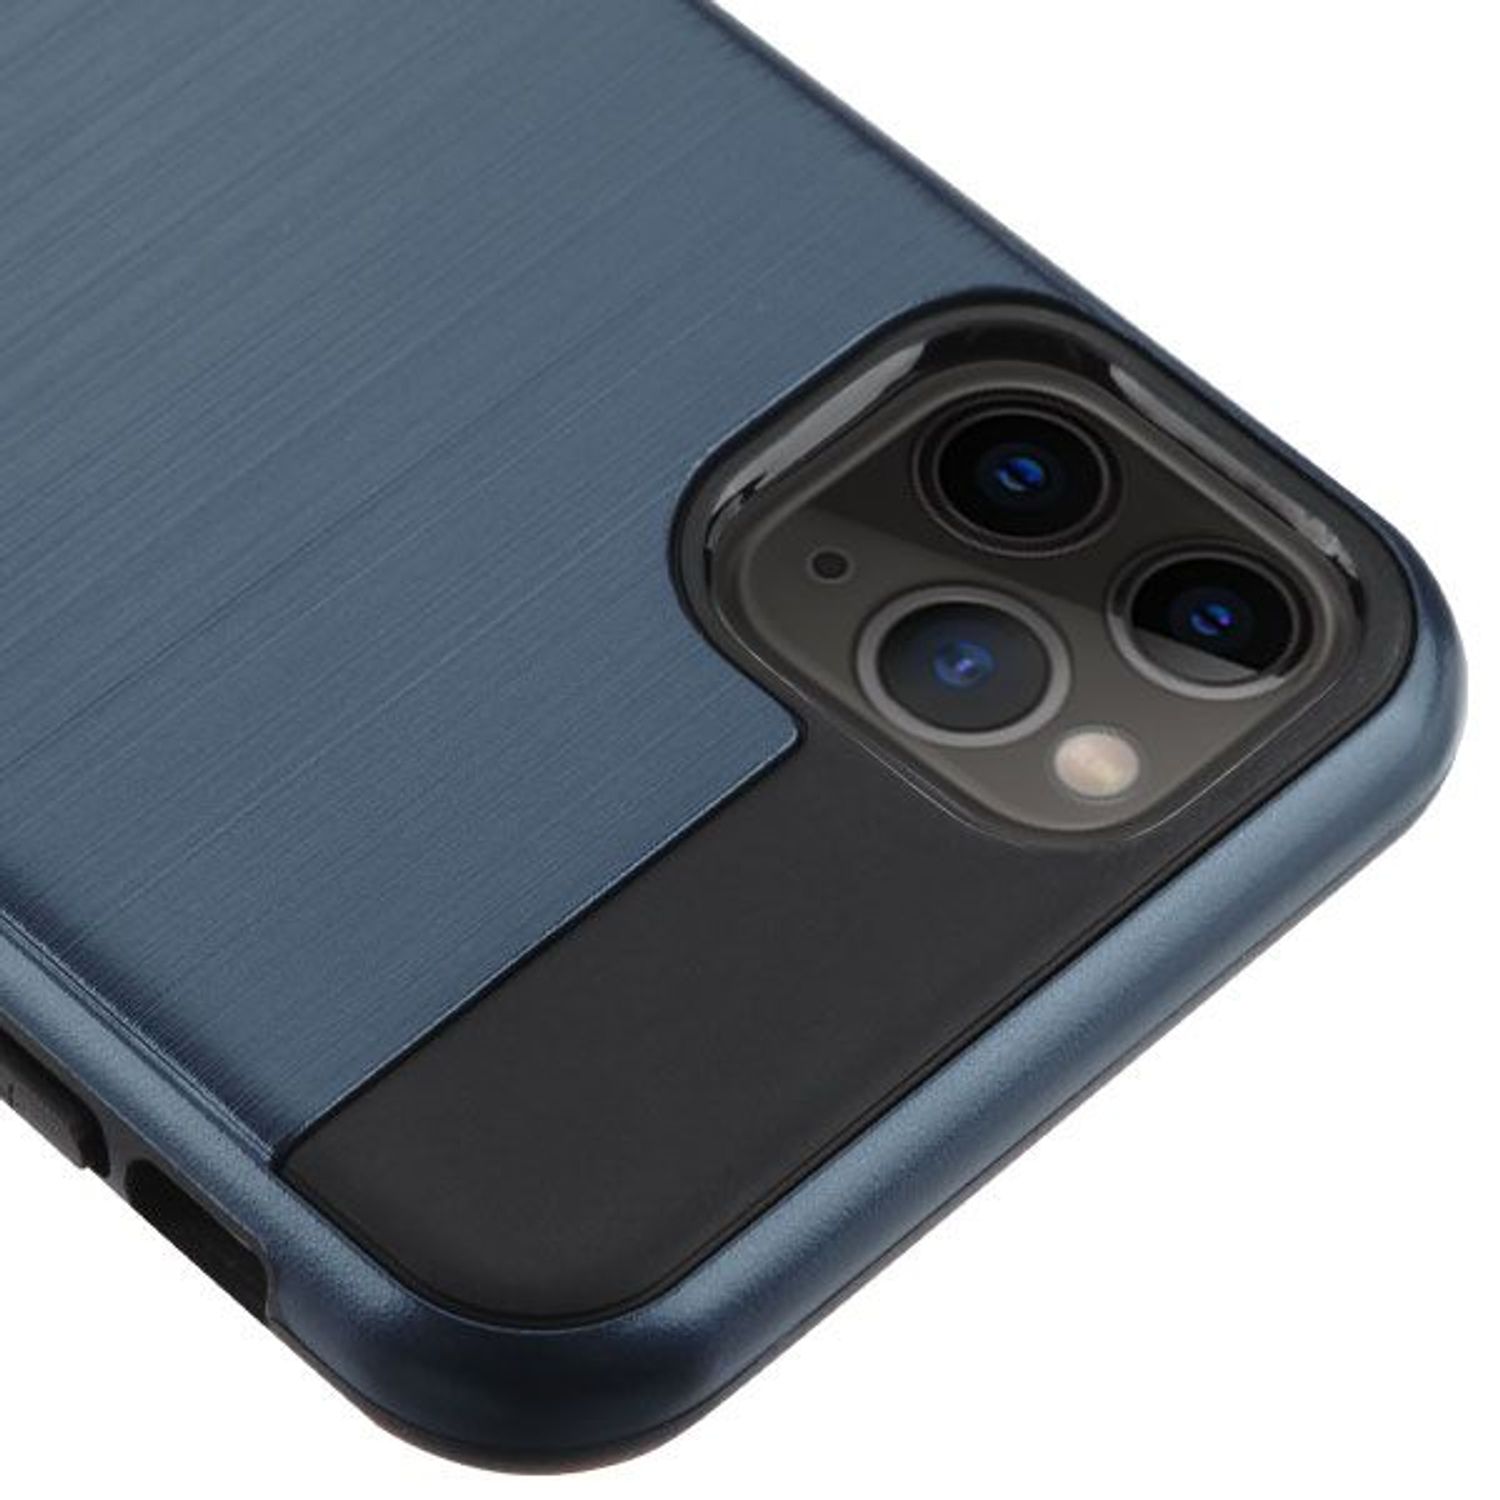 Asmyna Brushed Hybrid Protector Cover For Apple Iphone 11 Pro Max - Ink Blue Black - image 4 of 7